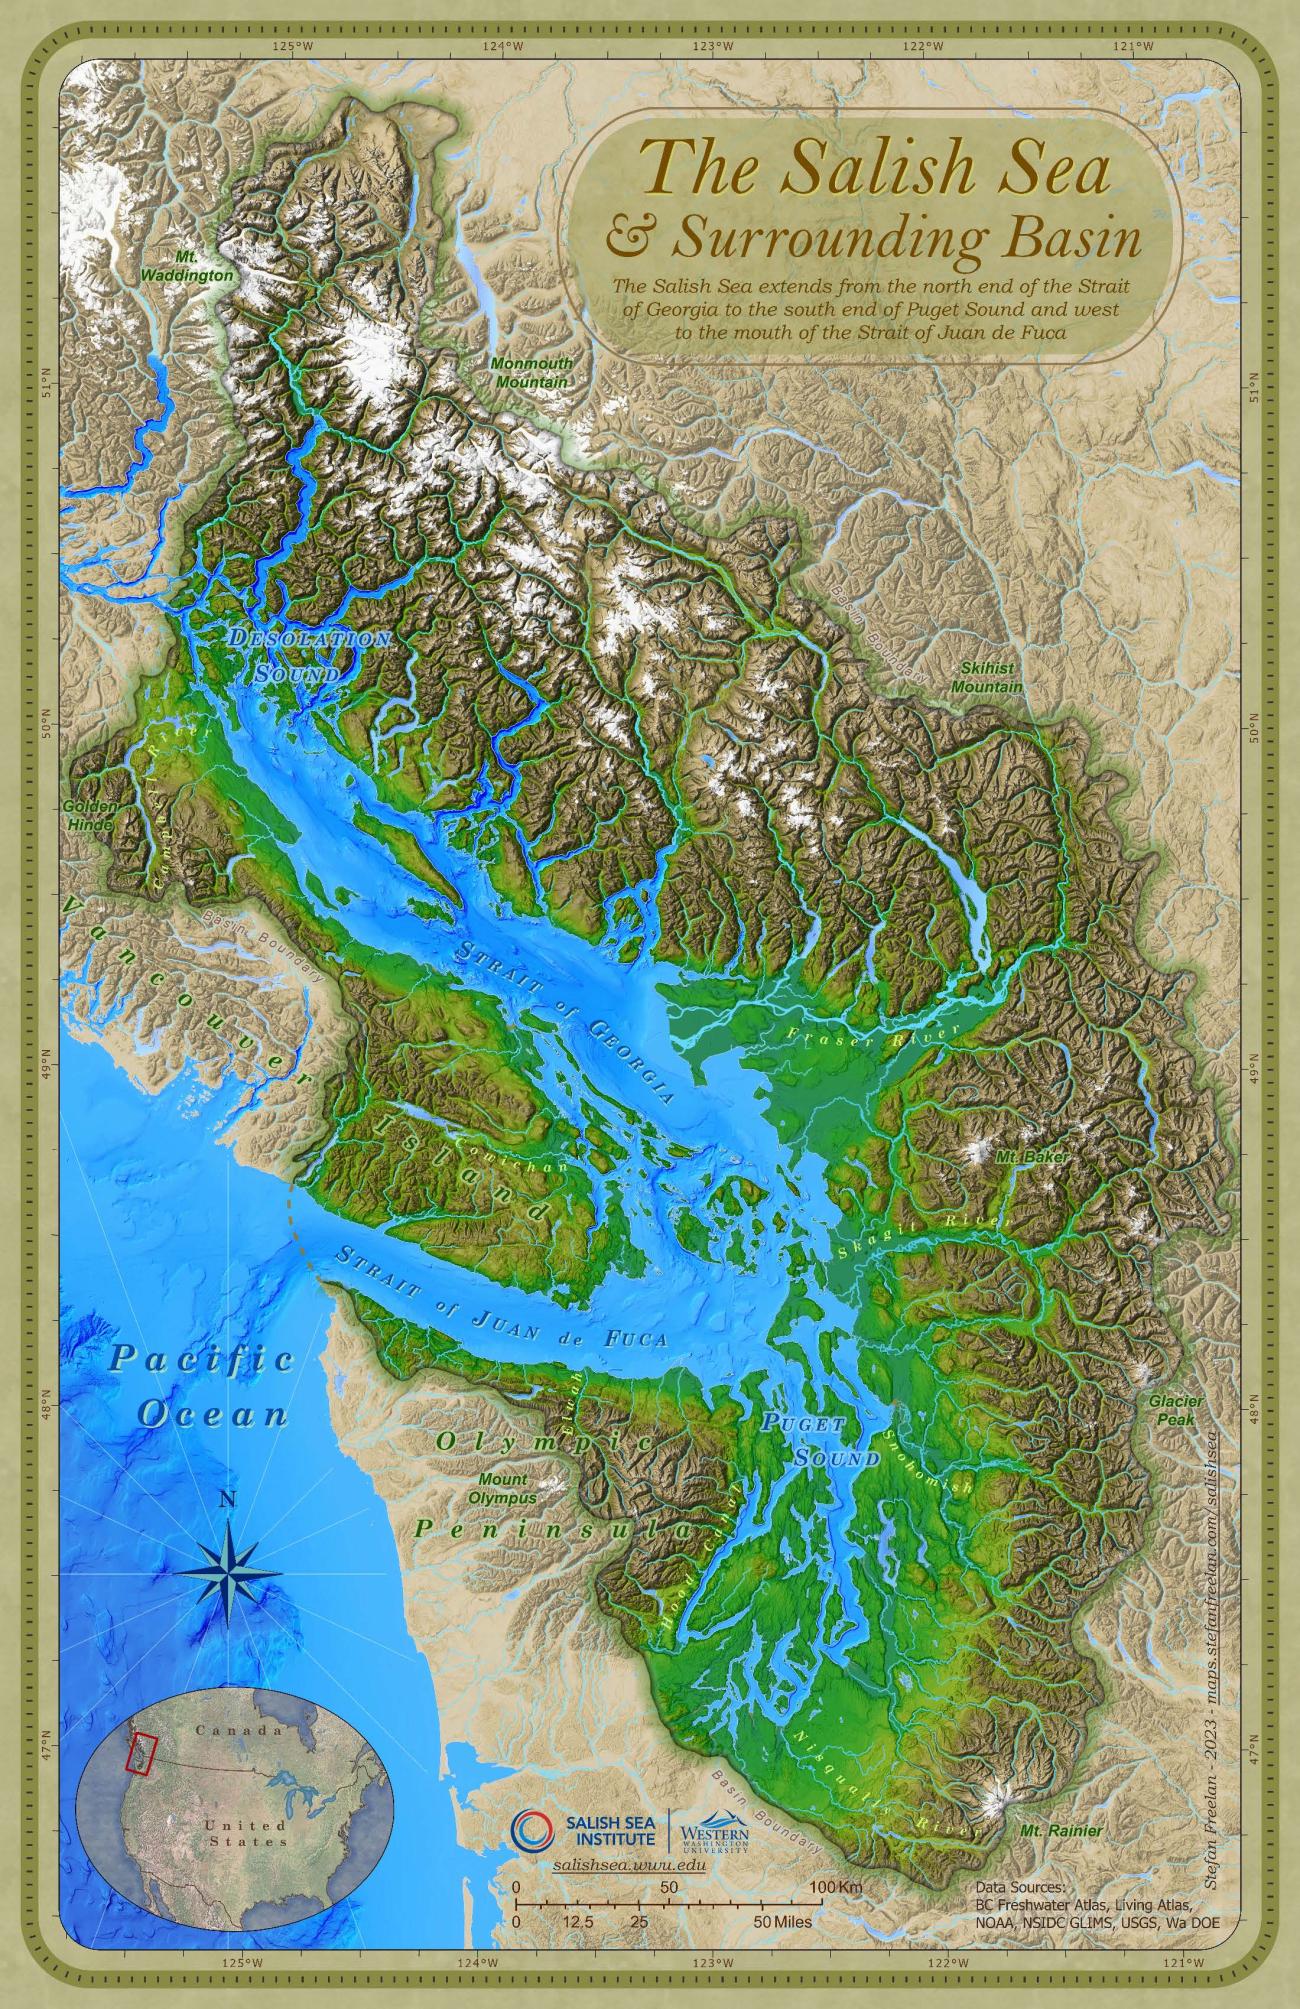 A map of Western Washington and the Salish Sea. The snow-capped, rugged Cascade Mountain range has rivers that flow into Desolation Sound and the Strait of Georgia. The Strait of Juan de Fuca connects to the Pacific Ocean. 